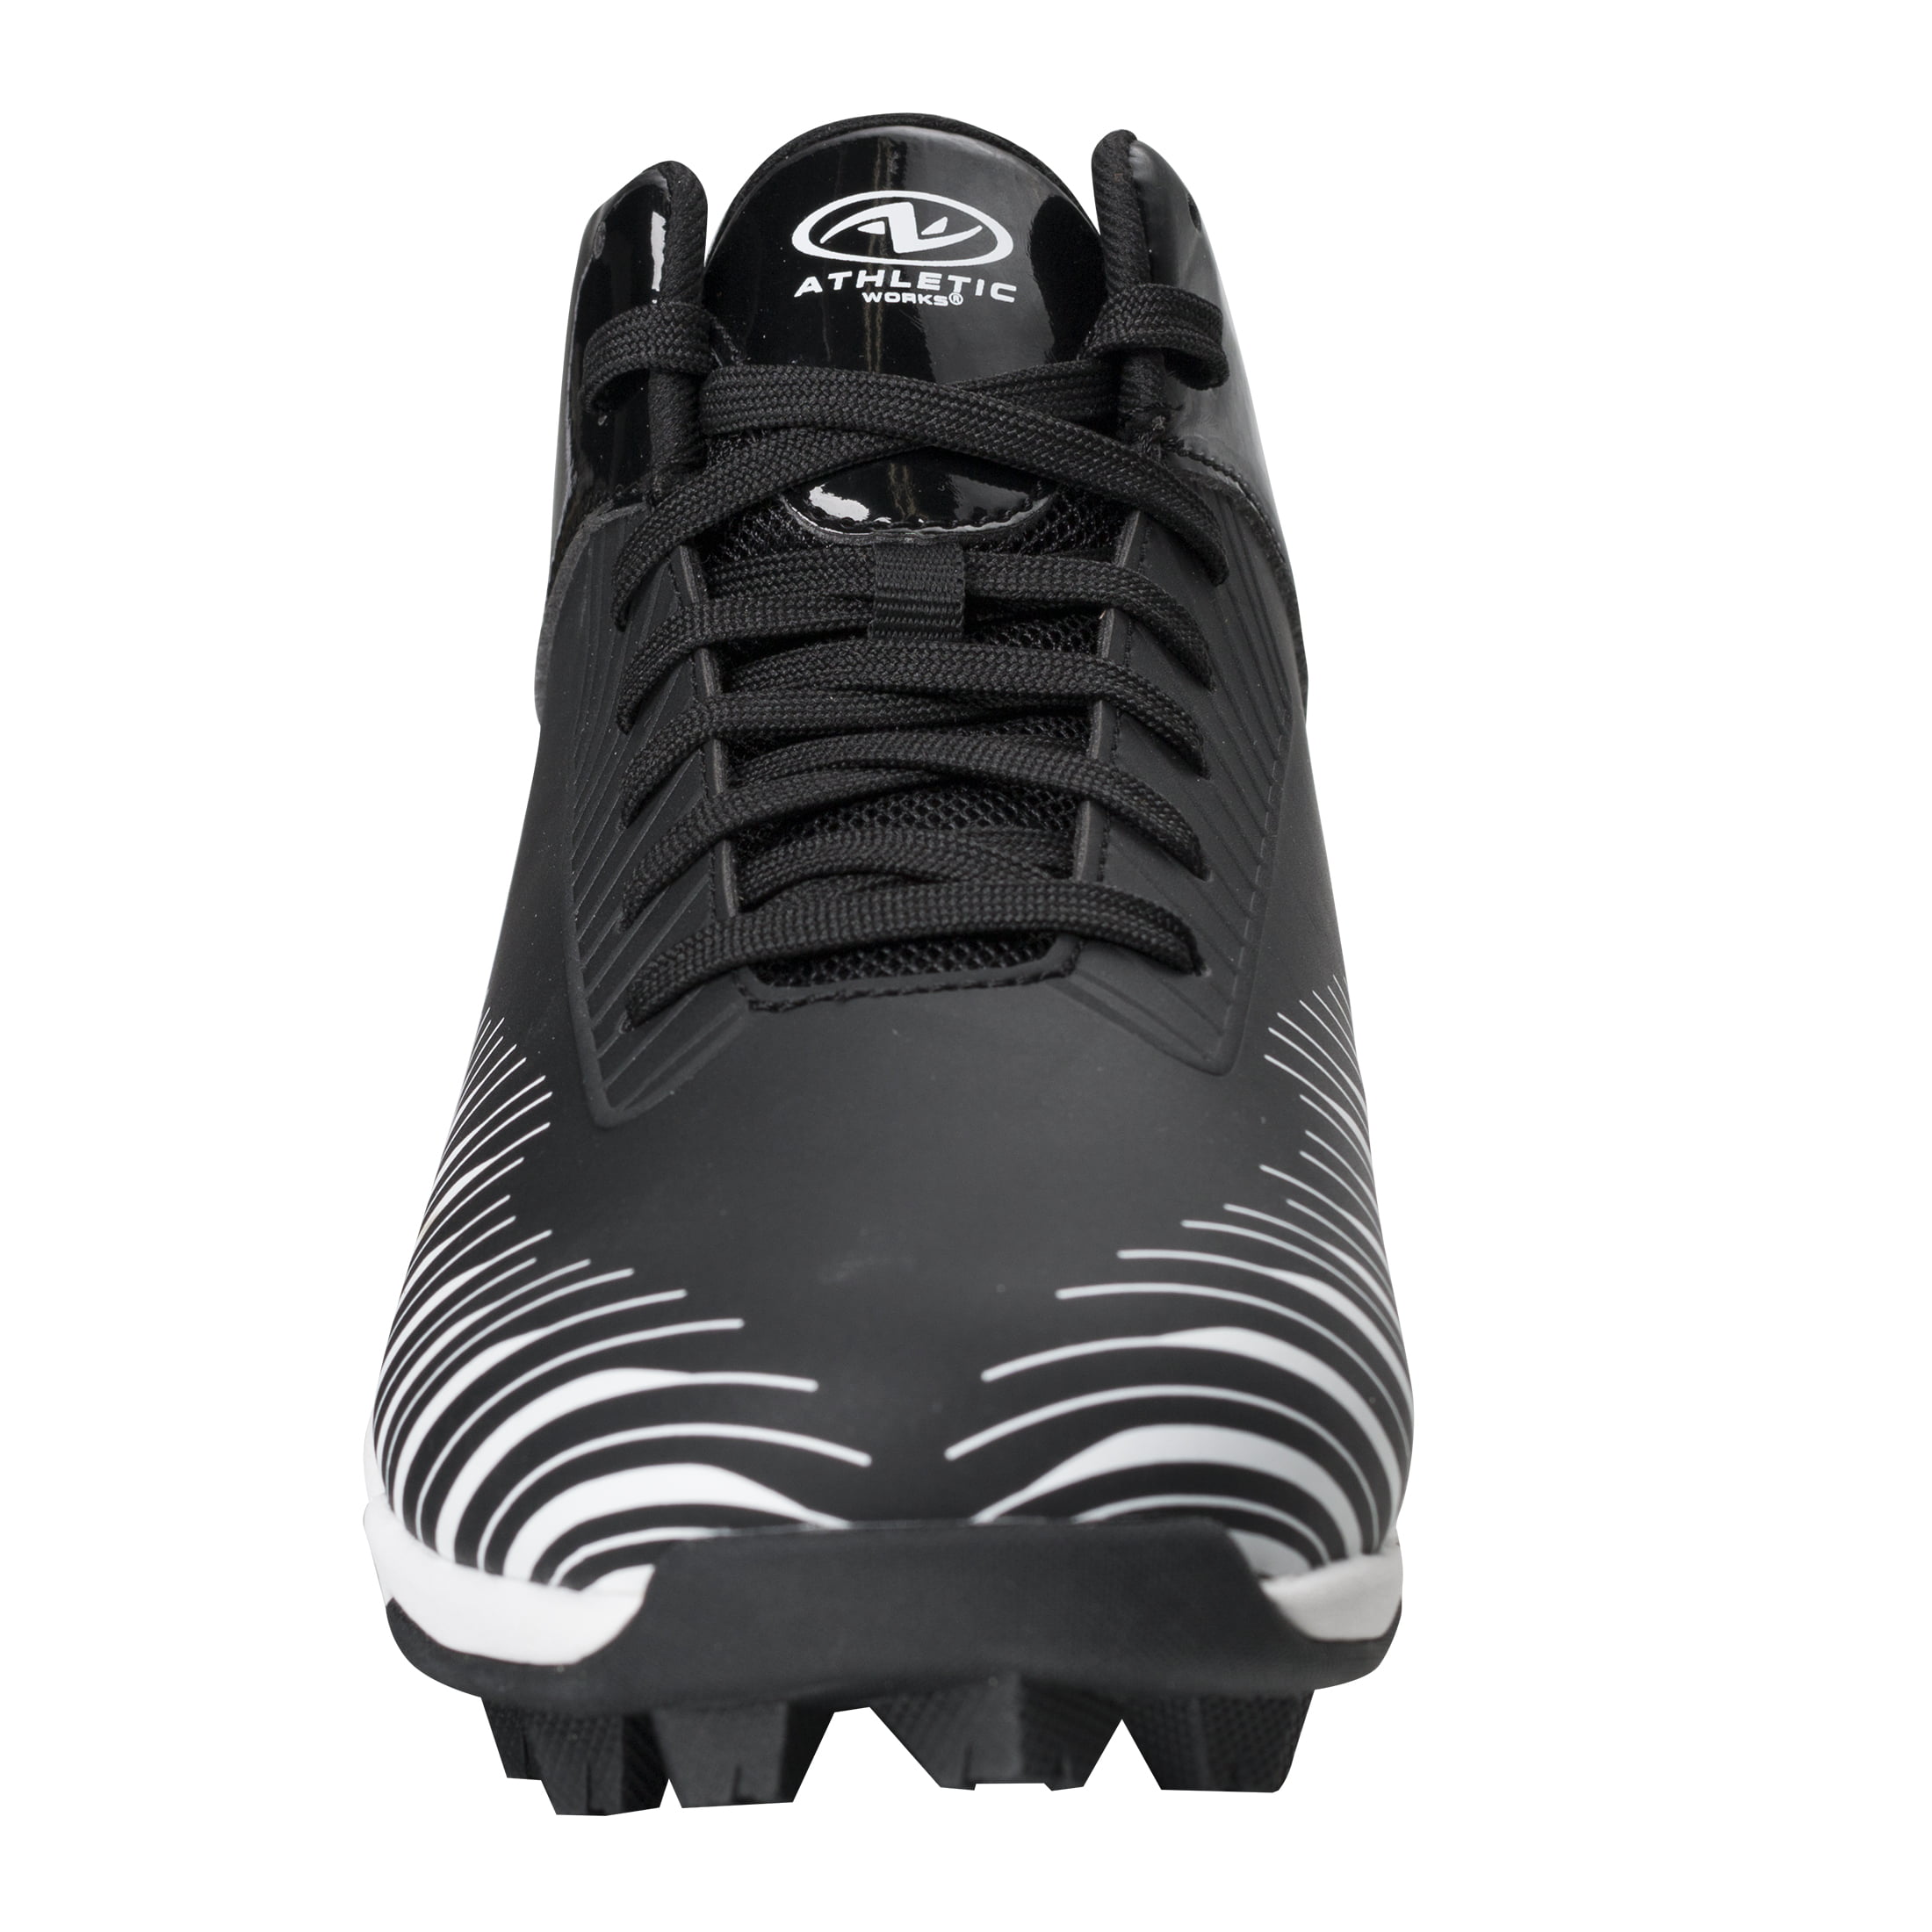 Athletic Works Soccer Football Cleats Youth Boys 6 EUR 38.5 black white NWT New 